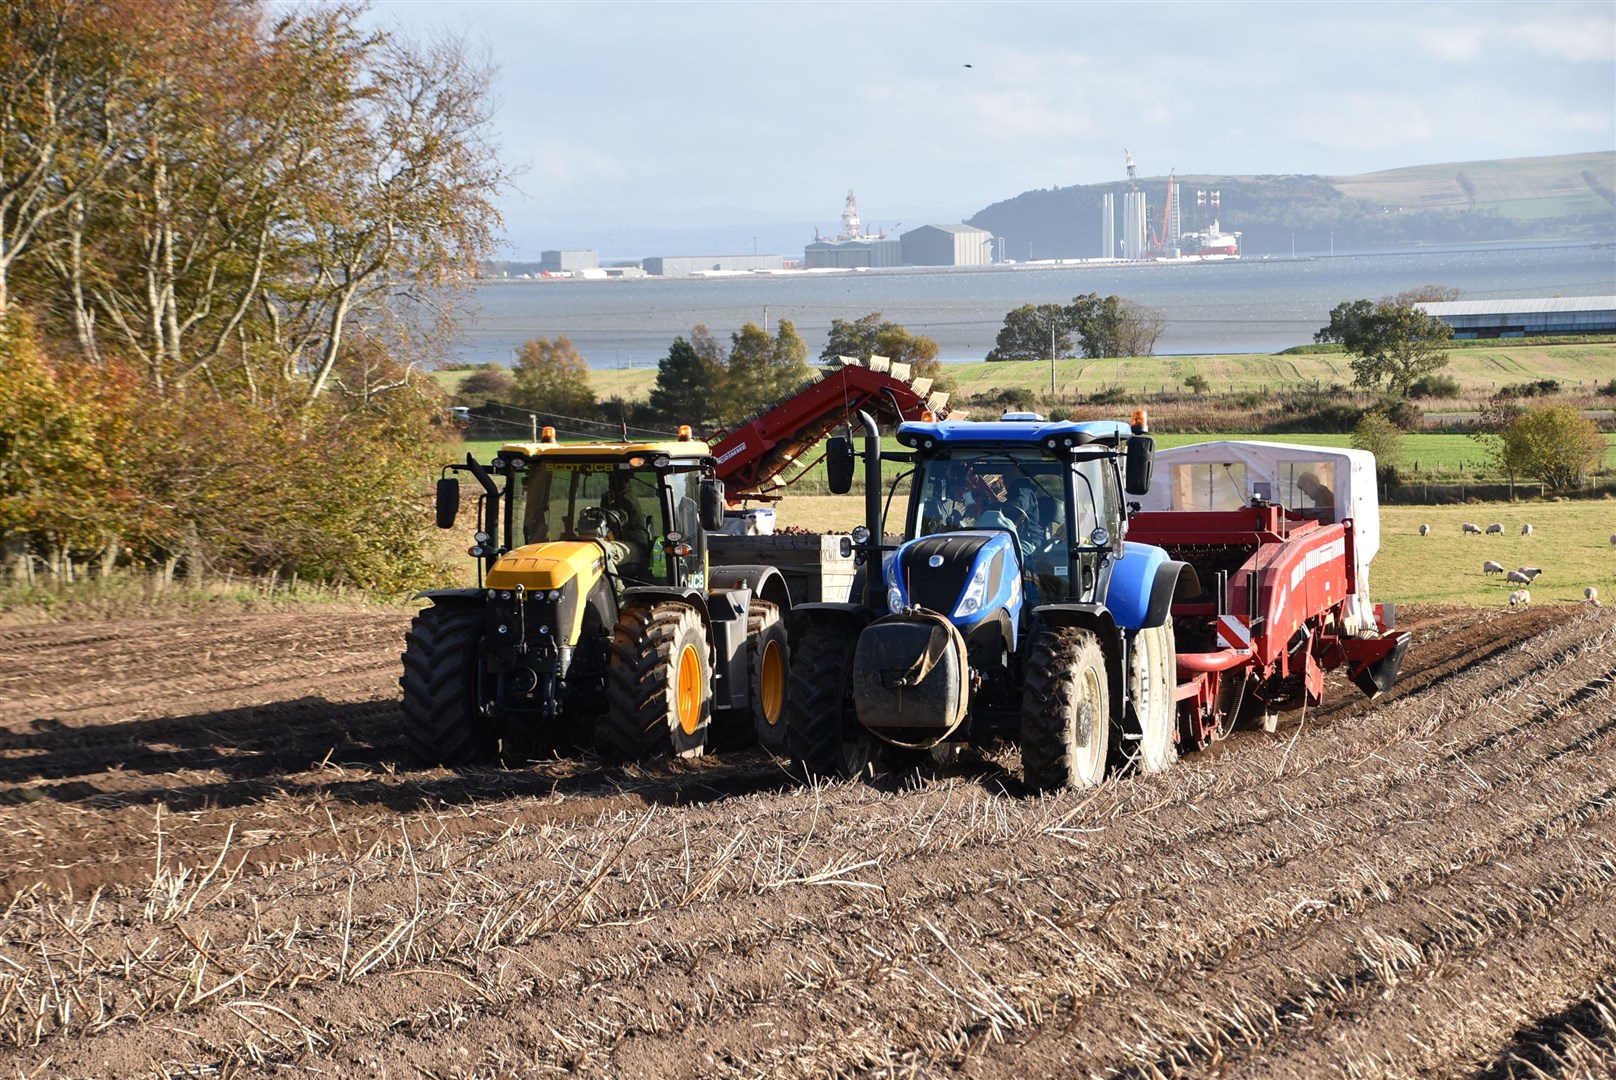 Harvesting potatoes at Balnagown with Nigg Energy Park in the background.